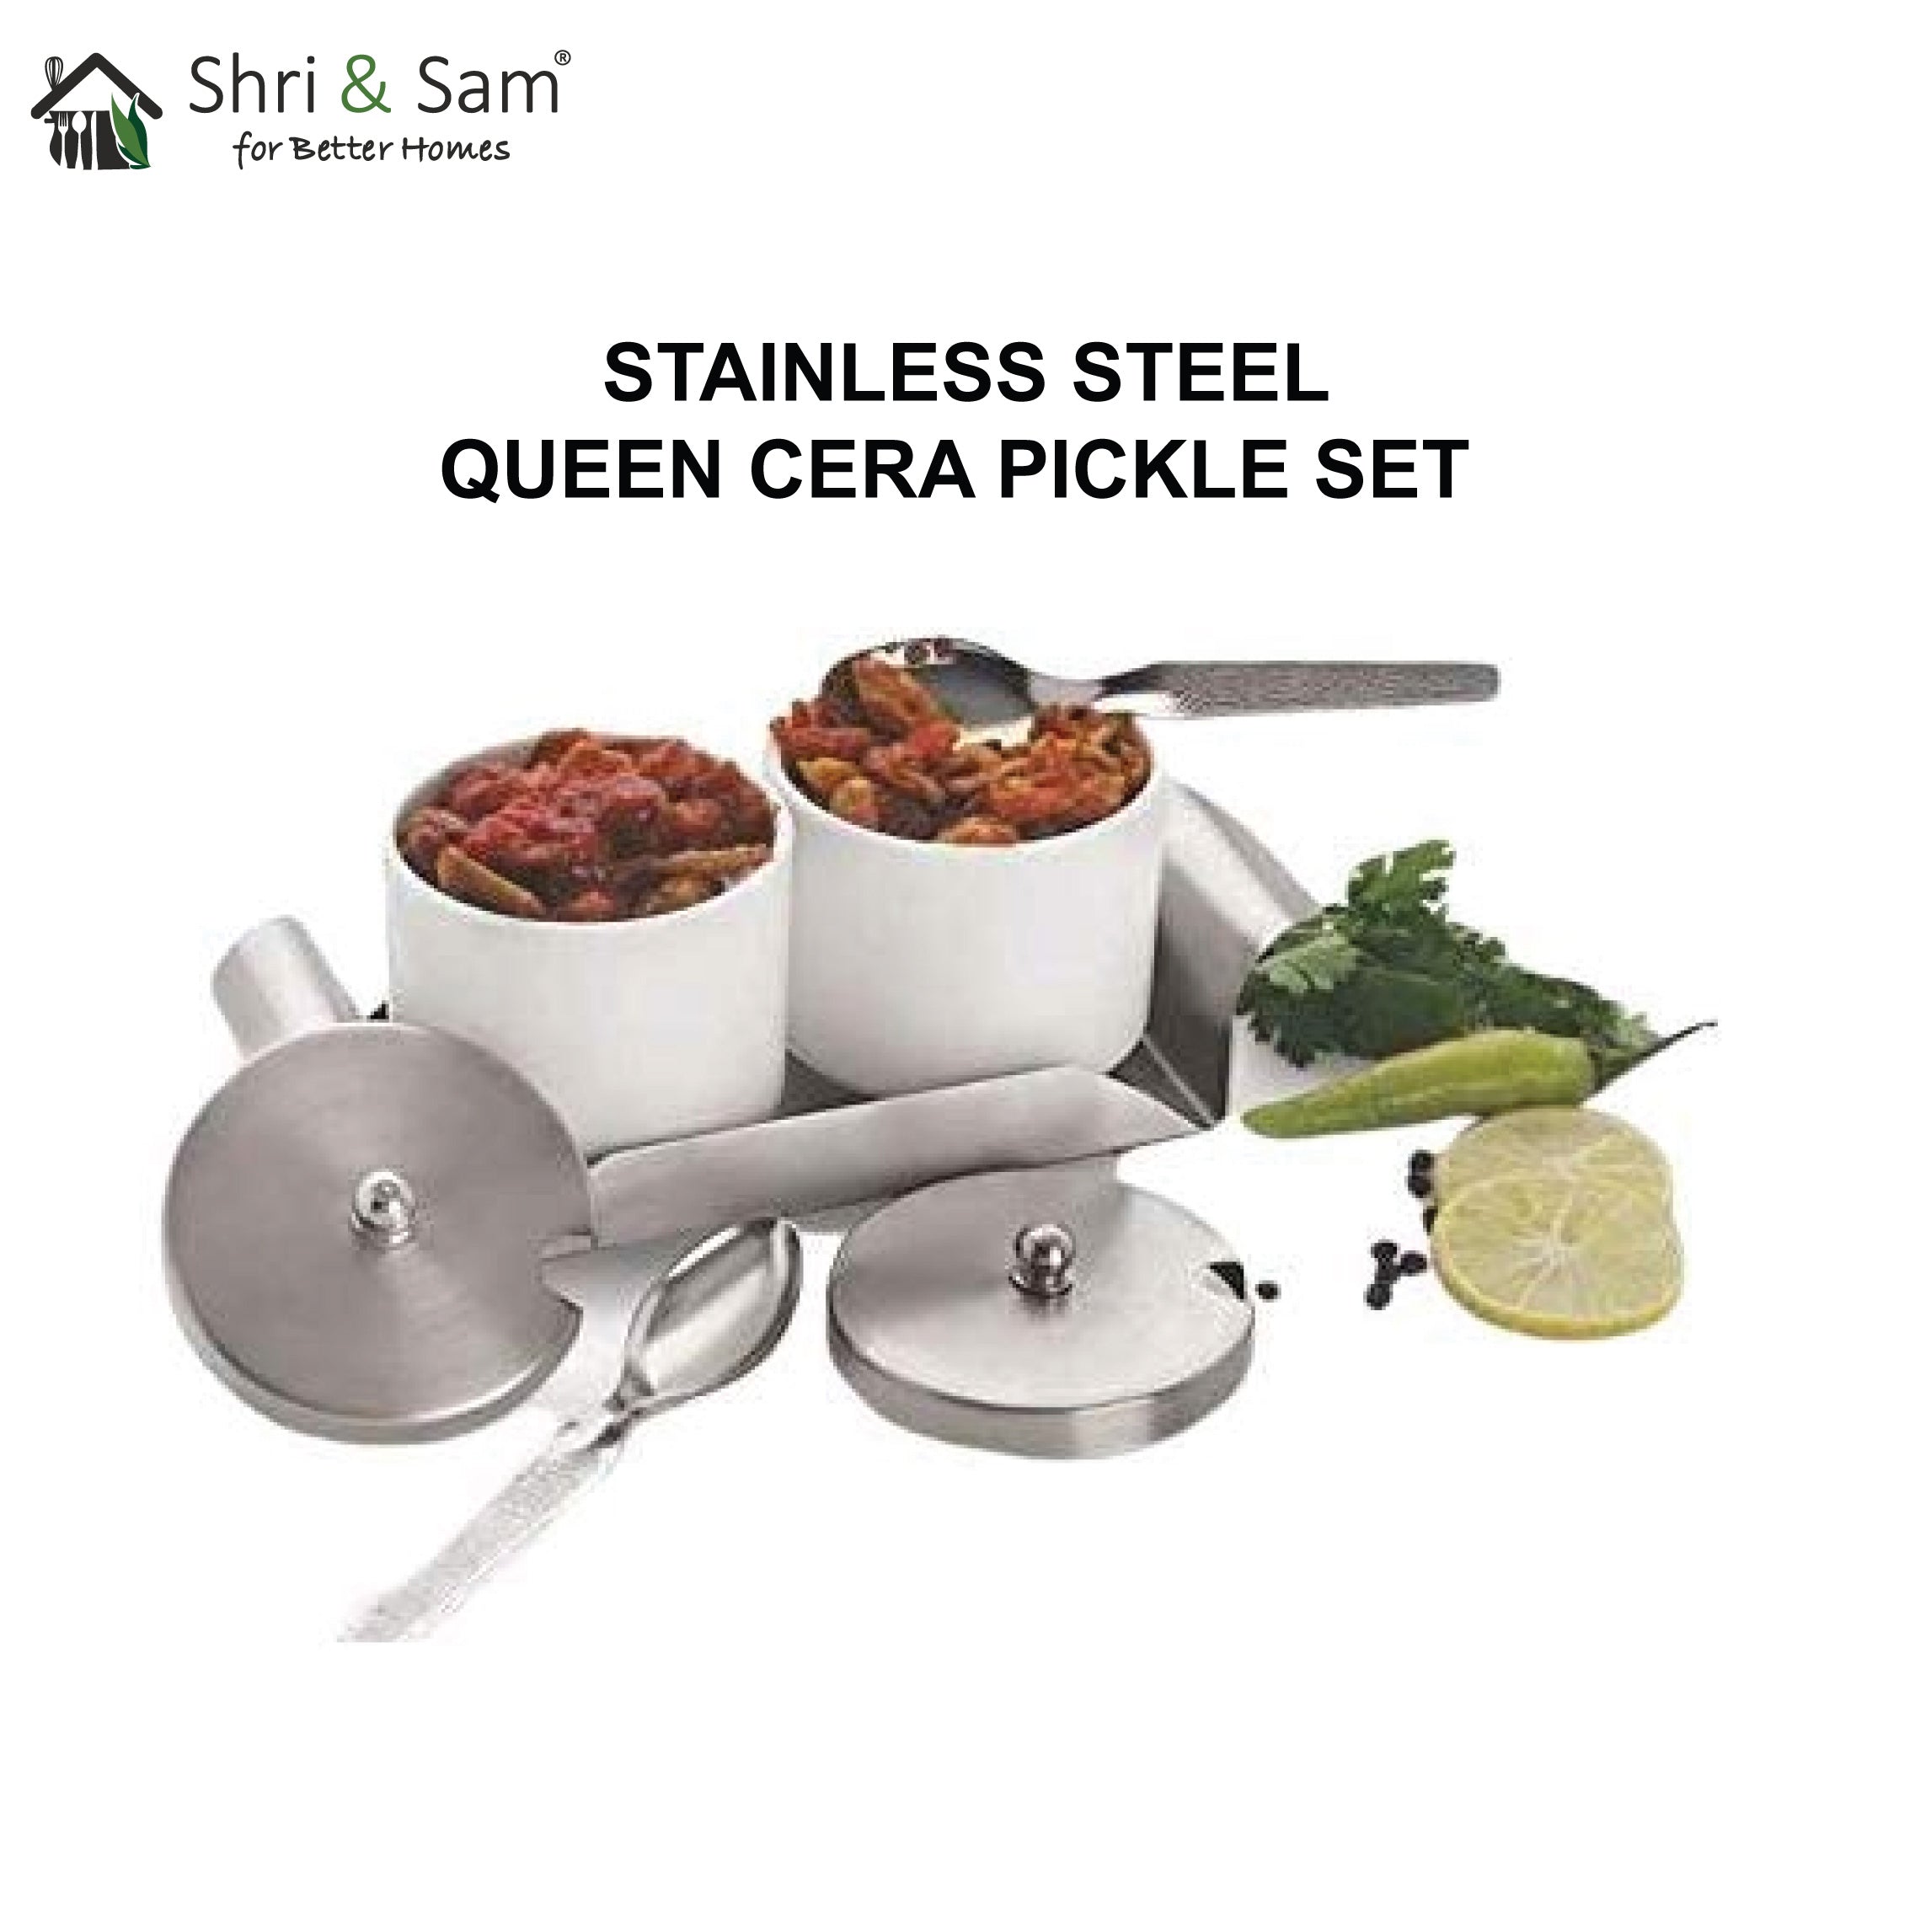 Stainless Steel 2 PCS Queen Cera Pickle Set